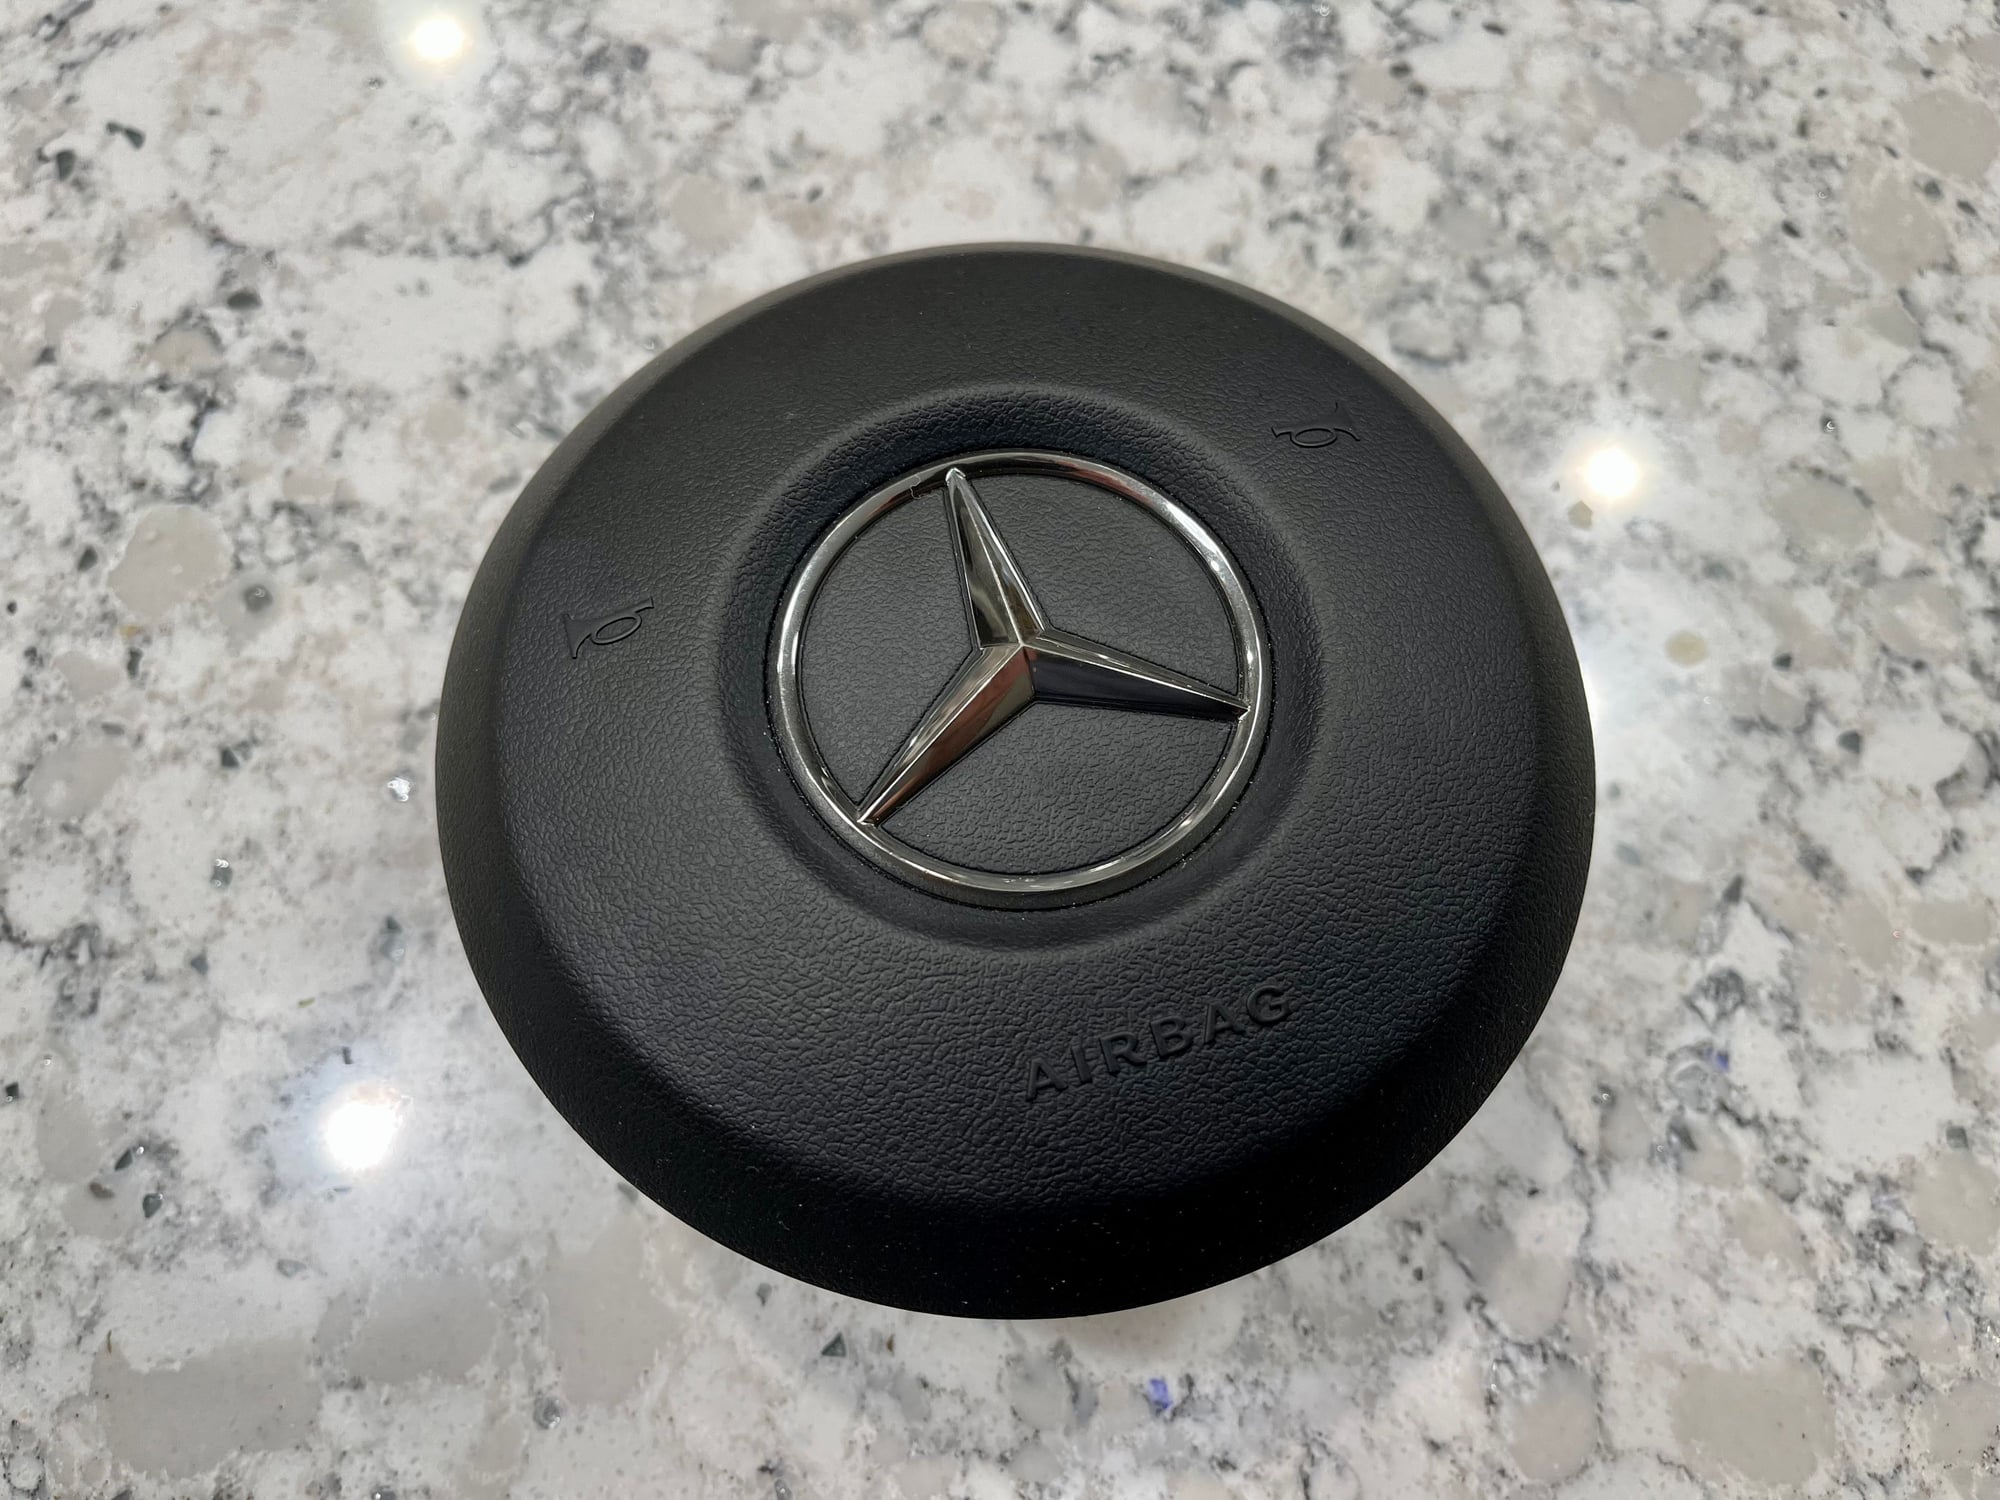 Miscellaneous - OEM W213 parts. AMG Night mirror caps, 19+ AMG heated wheel, airbag... - Used - 2018 to 2023 Mercedes-Benz E63 AMG S - Fernandina Beach, FL 32034, United States